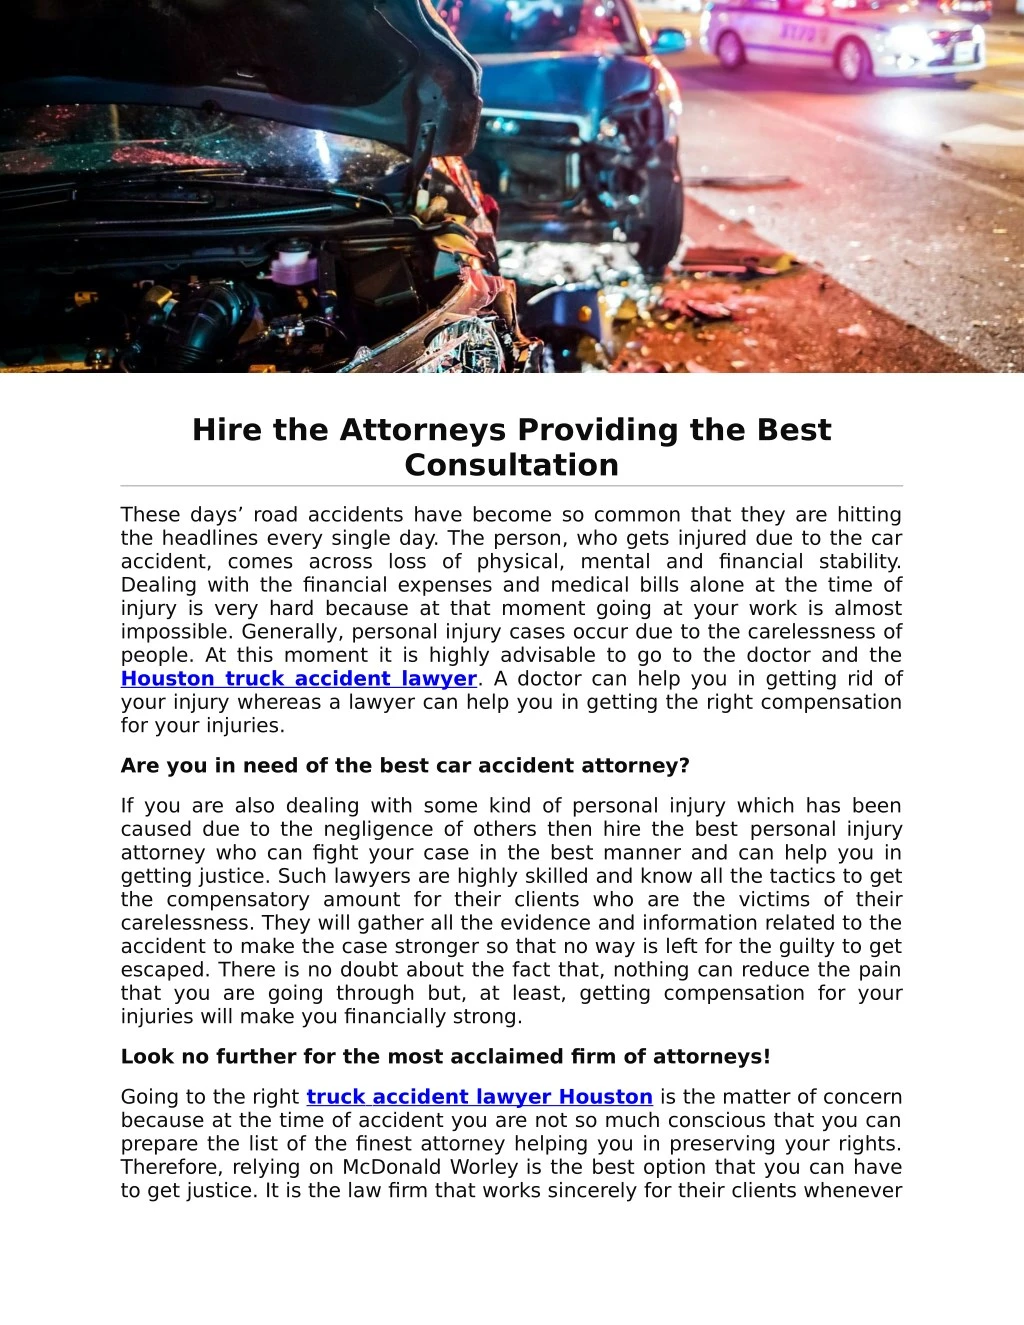 hire the attorneys providing the best consultation